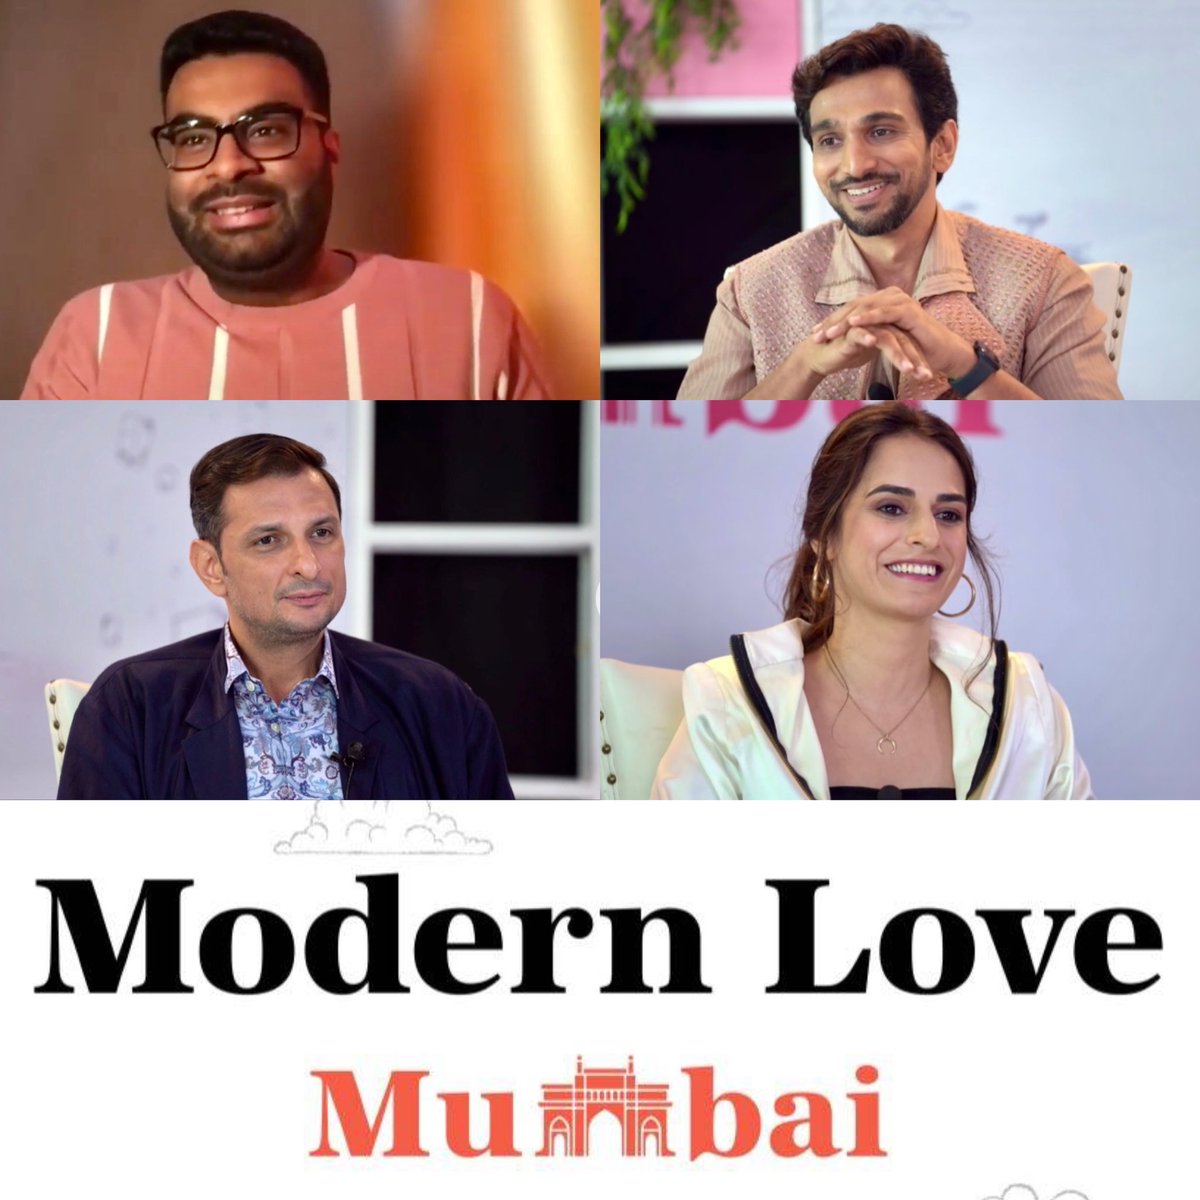 @mehtahansal’s ‘Baai’ segment in #ModernLove on #PrimeVideo feels so personal. A man coming out to his grandmother, its a homage to our #LGBTQIA community. Privileged to speak with actors #RushadRana, @pratikg80 & @Kashmira_Irani. Interview coming on @FilmeShilmy. #pratikgandhi